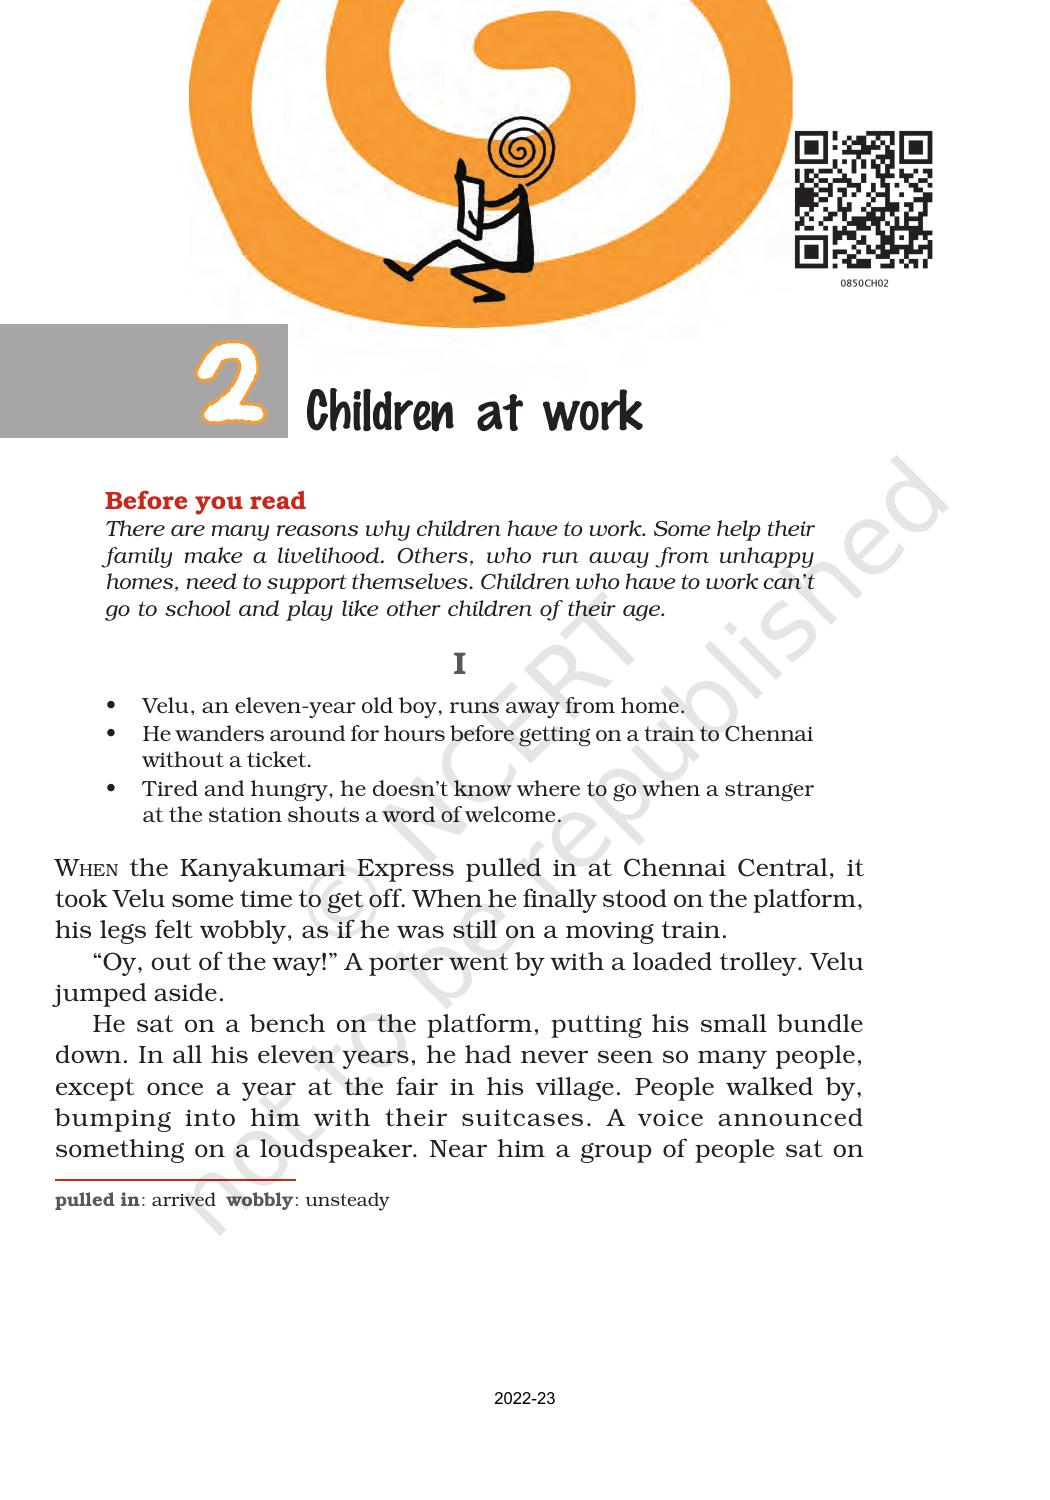 NCERT Book for Class 8 English It So Happened Chapter 2 Children at Work - Page 1